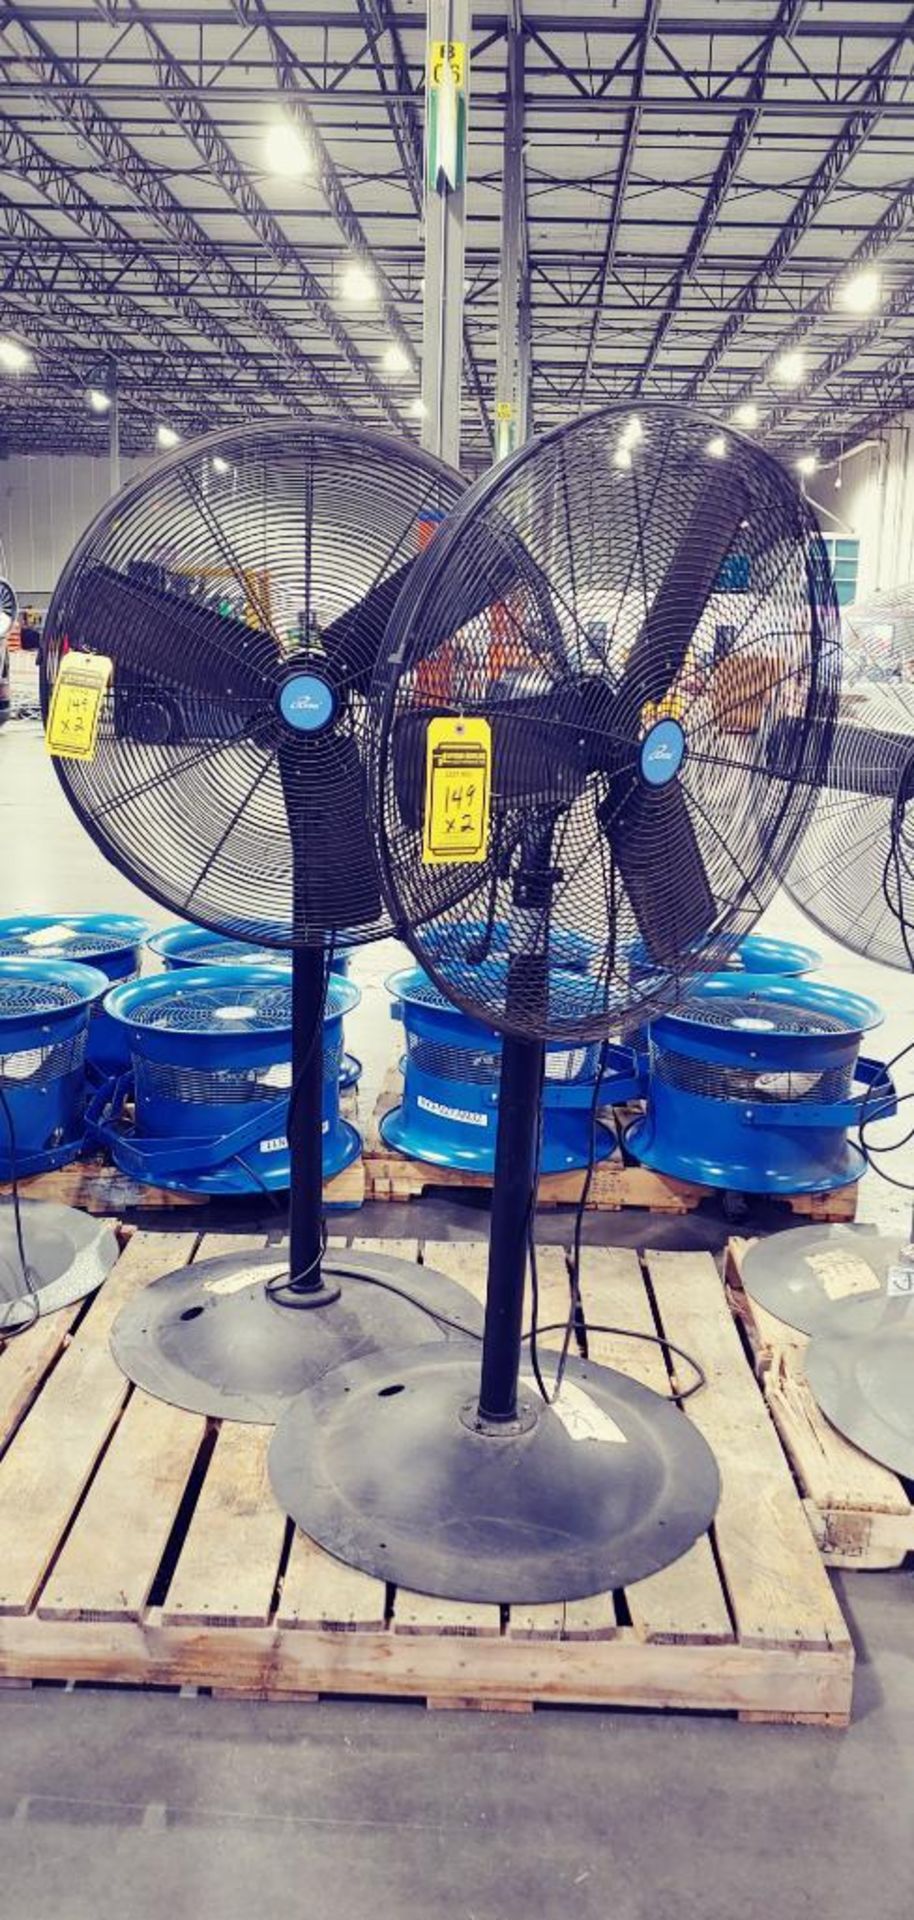 (2x) iLiving 30" Pedestal Fans ($20 Loading Fee Will Be Added To Invoice)